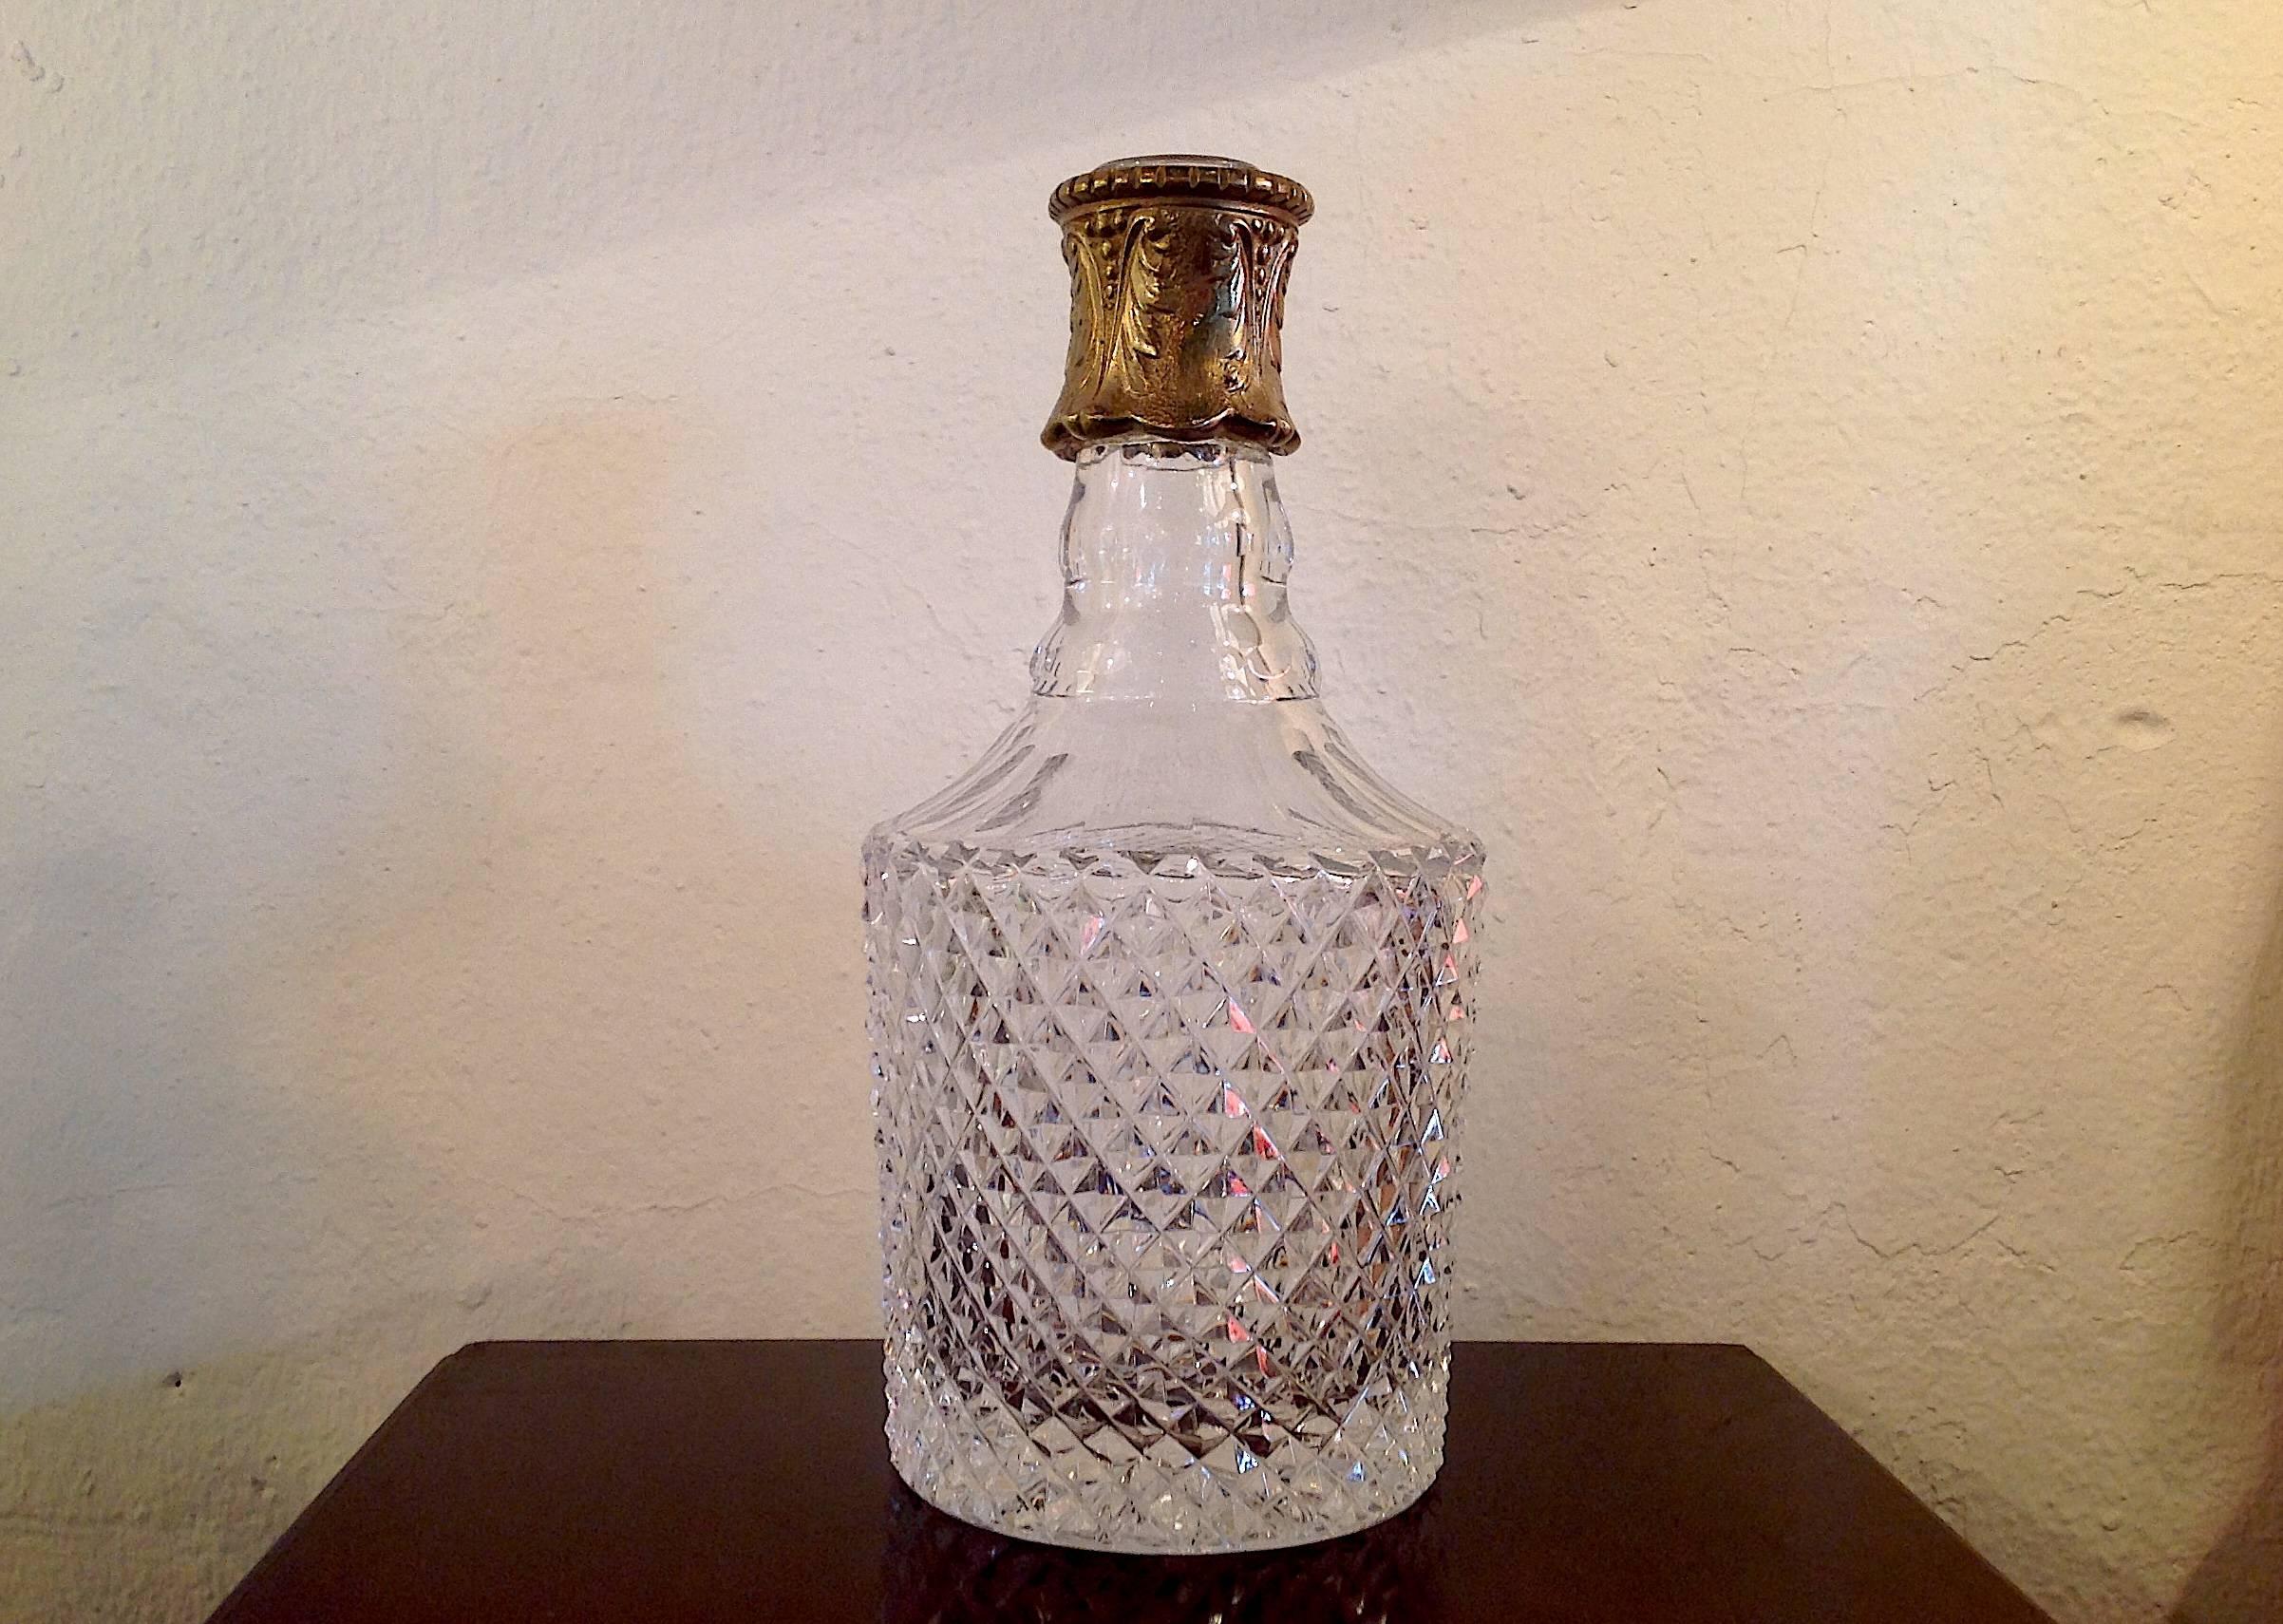 Vintage fine cut crystal decanter with mounted brass neck, with stopper, measures 12 inches high and 5 inches wide.